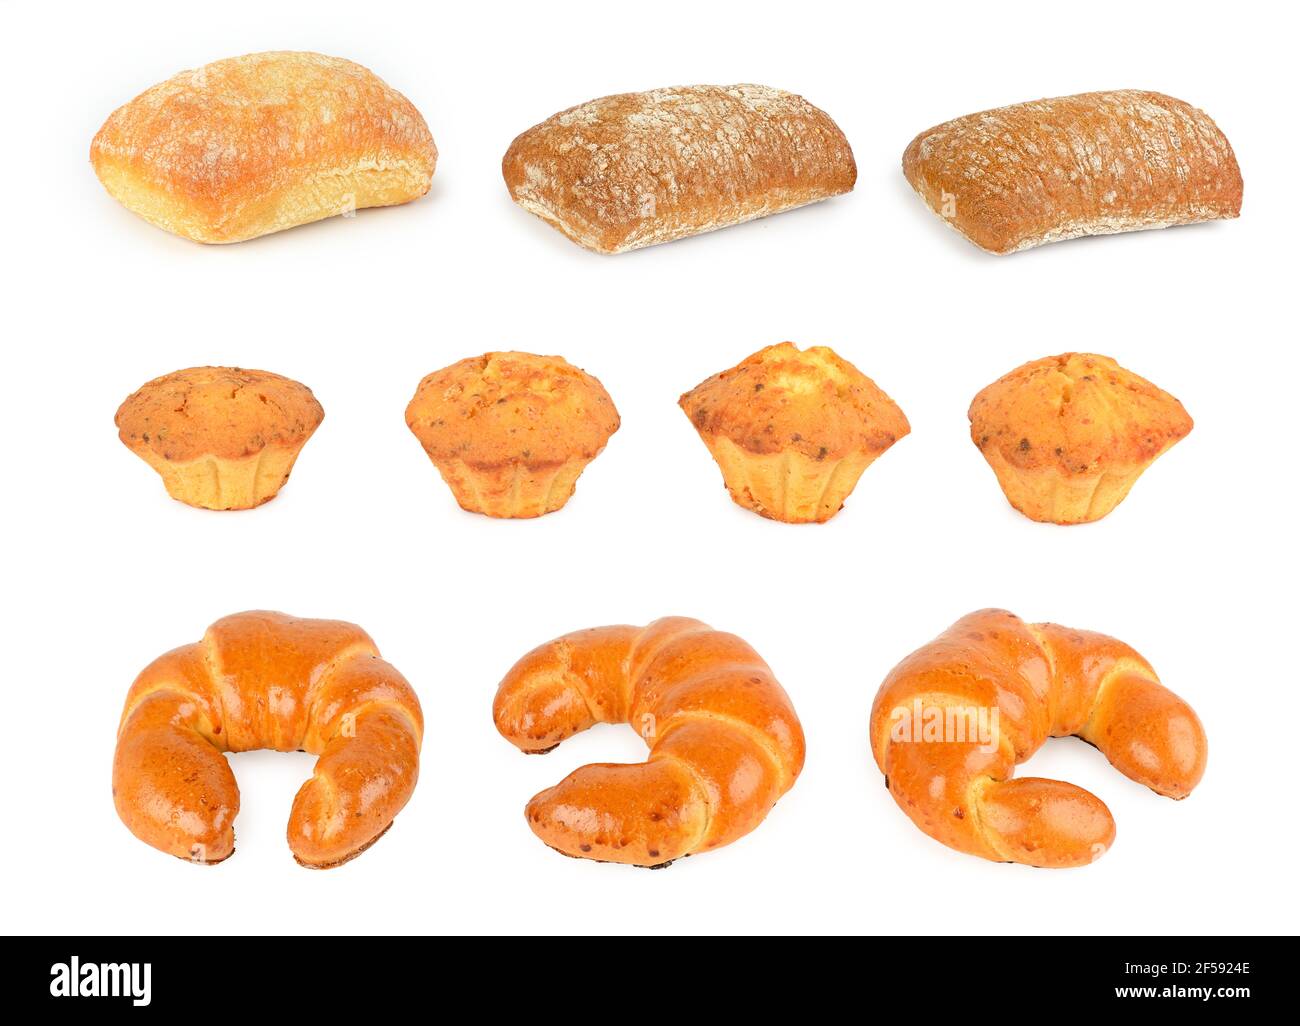 Set fresh bread products (buns, croissants, ciabatta) isolated on white background Stock Photo